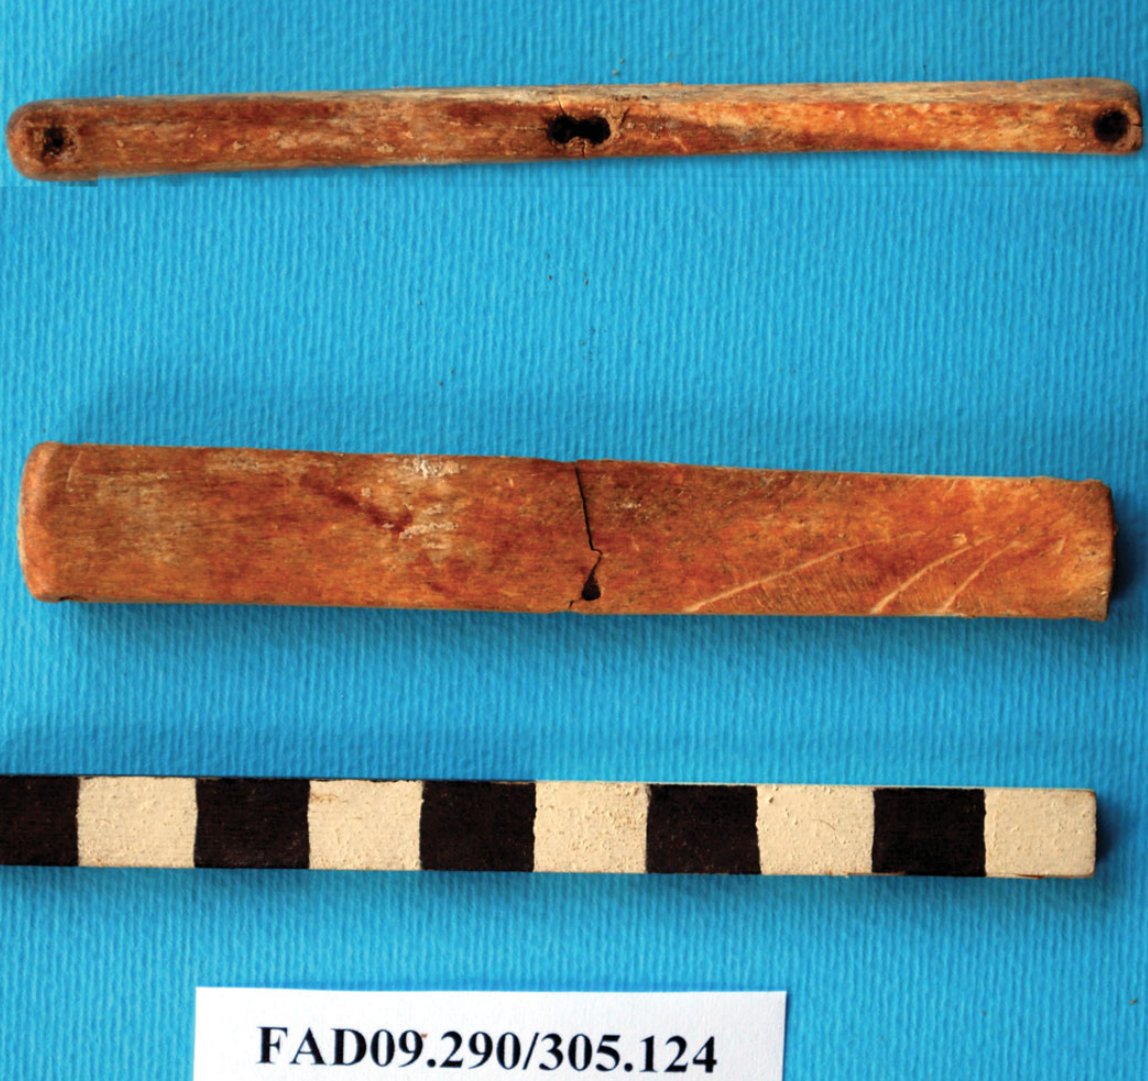 Unique find No.1, a small bone beam for weighing precious commodities. It's the only example attested in the Levant, and is also slightly earlier than the scale beams found in Anatolia and the Aegean (dated to the mid-3rd millennium BC). (3/5)